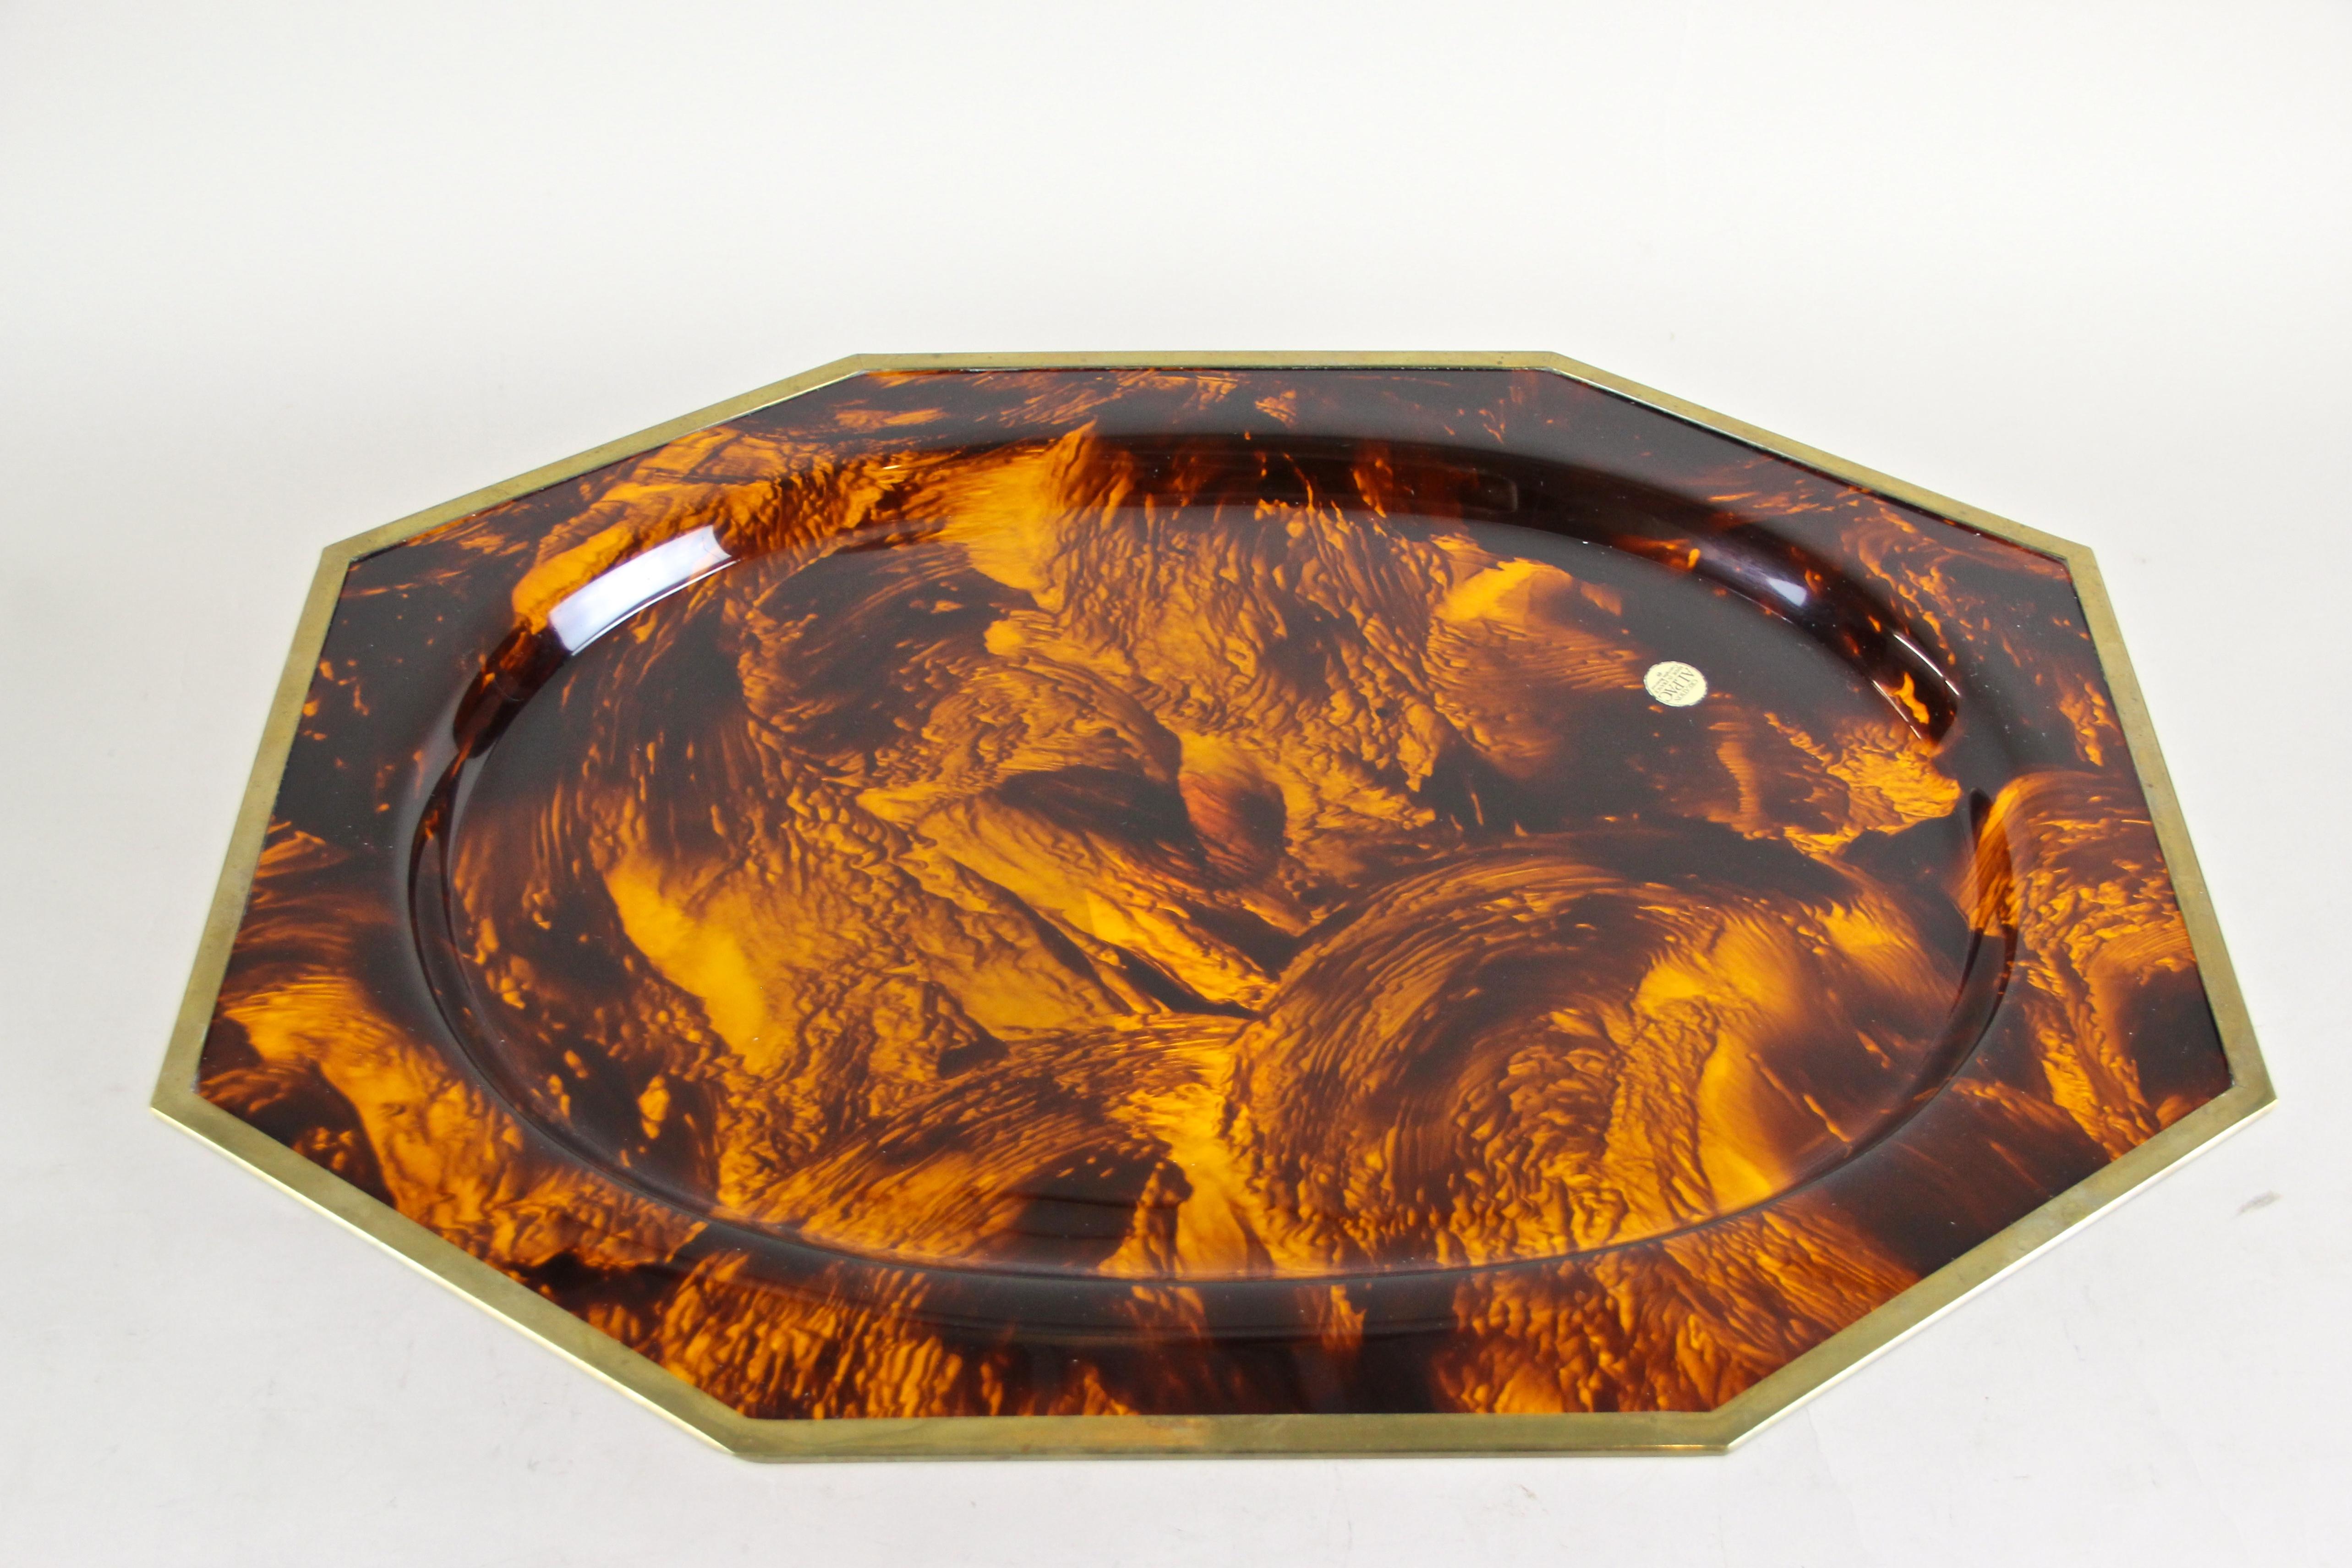 Extraordinary faux tortoiseshell plexiglass plate with brass edges by Creation ALPAC, made in France, circa 1980. This unique plate was beautifully processed to give it the look of a tortoiseshell with a fantastic amber coloration. Octagonal shaped